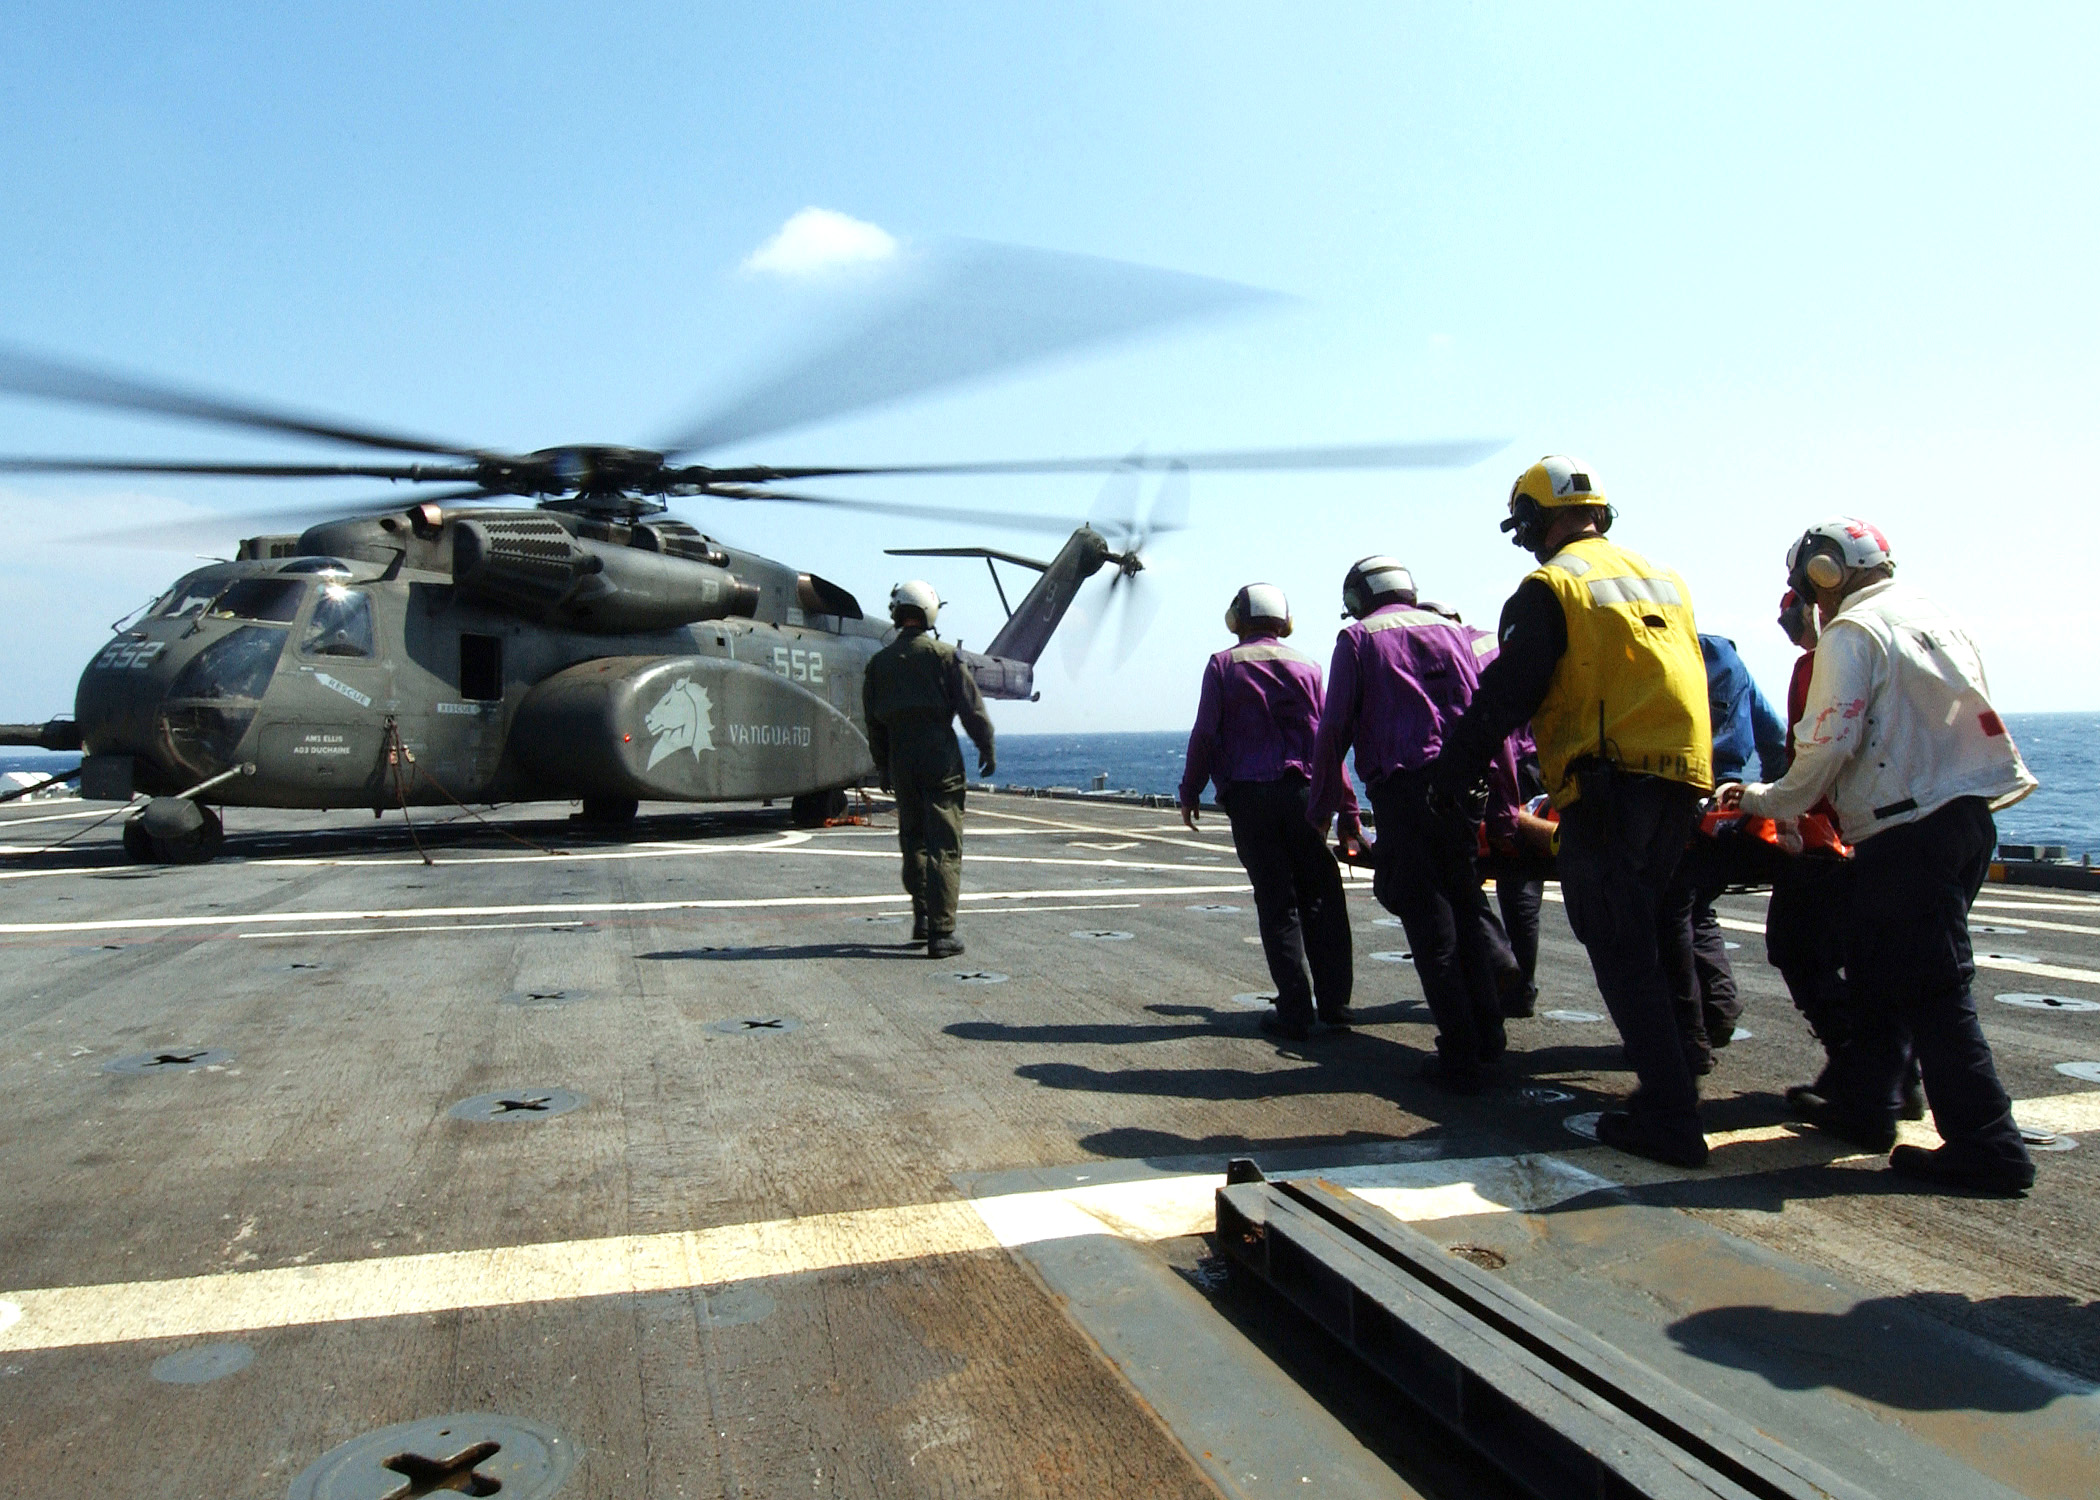 US Navy 050508-N-4374S-003 Stretcher bearers assigned to the amphibious transport dock ship USS Trenton (LPD 14), carry an 83-year old civilian, to an MH-53E Sea Dragon helicopter